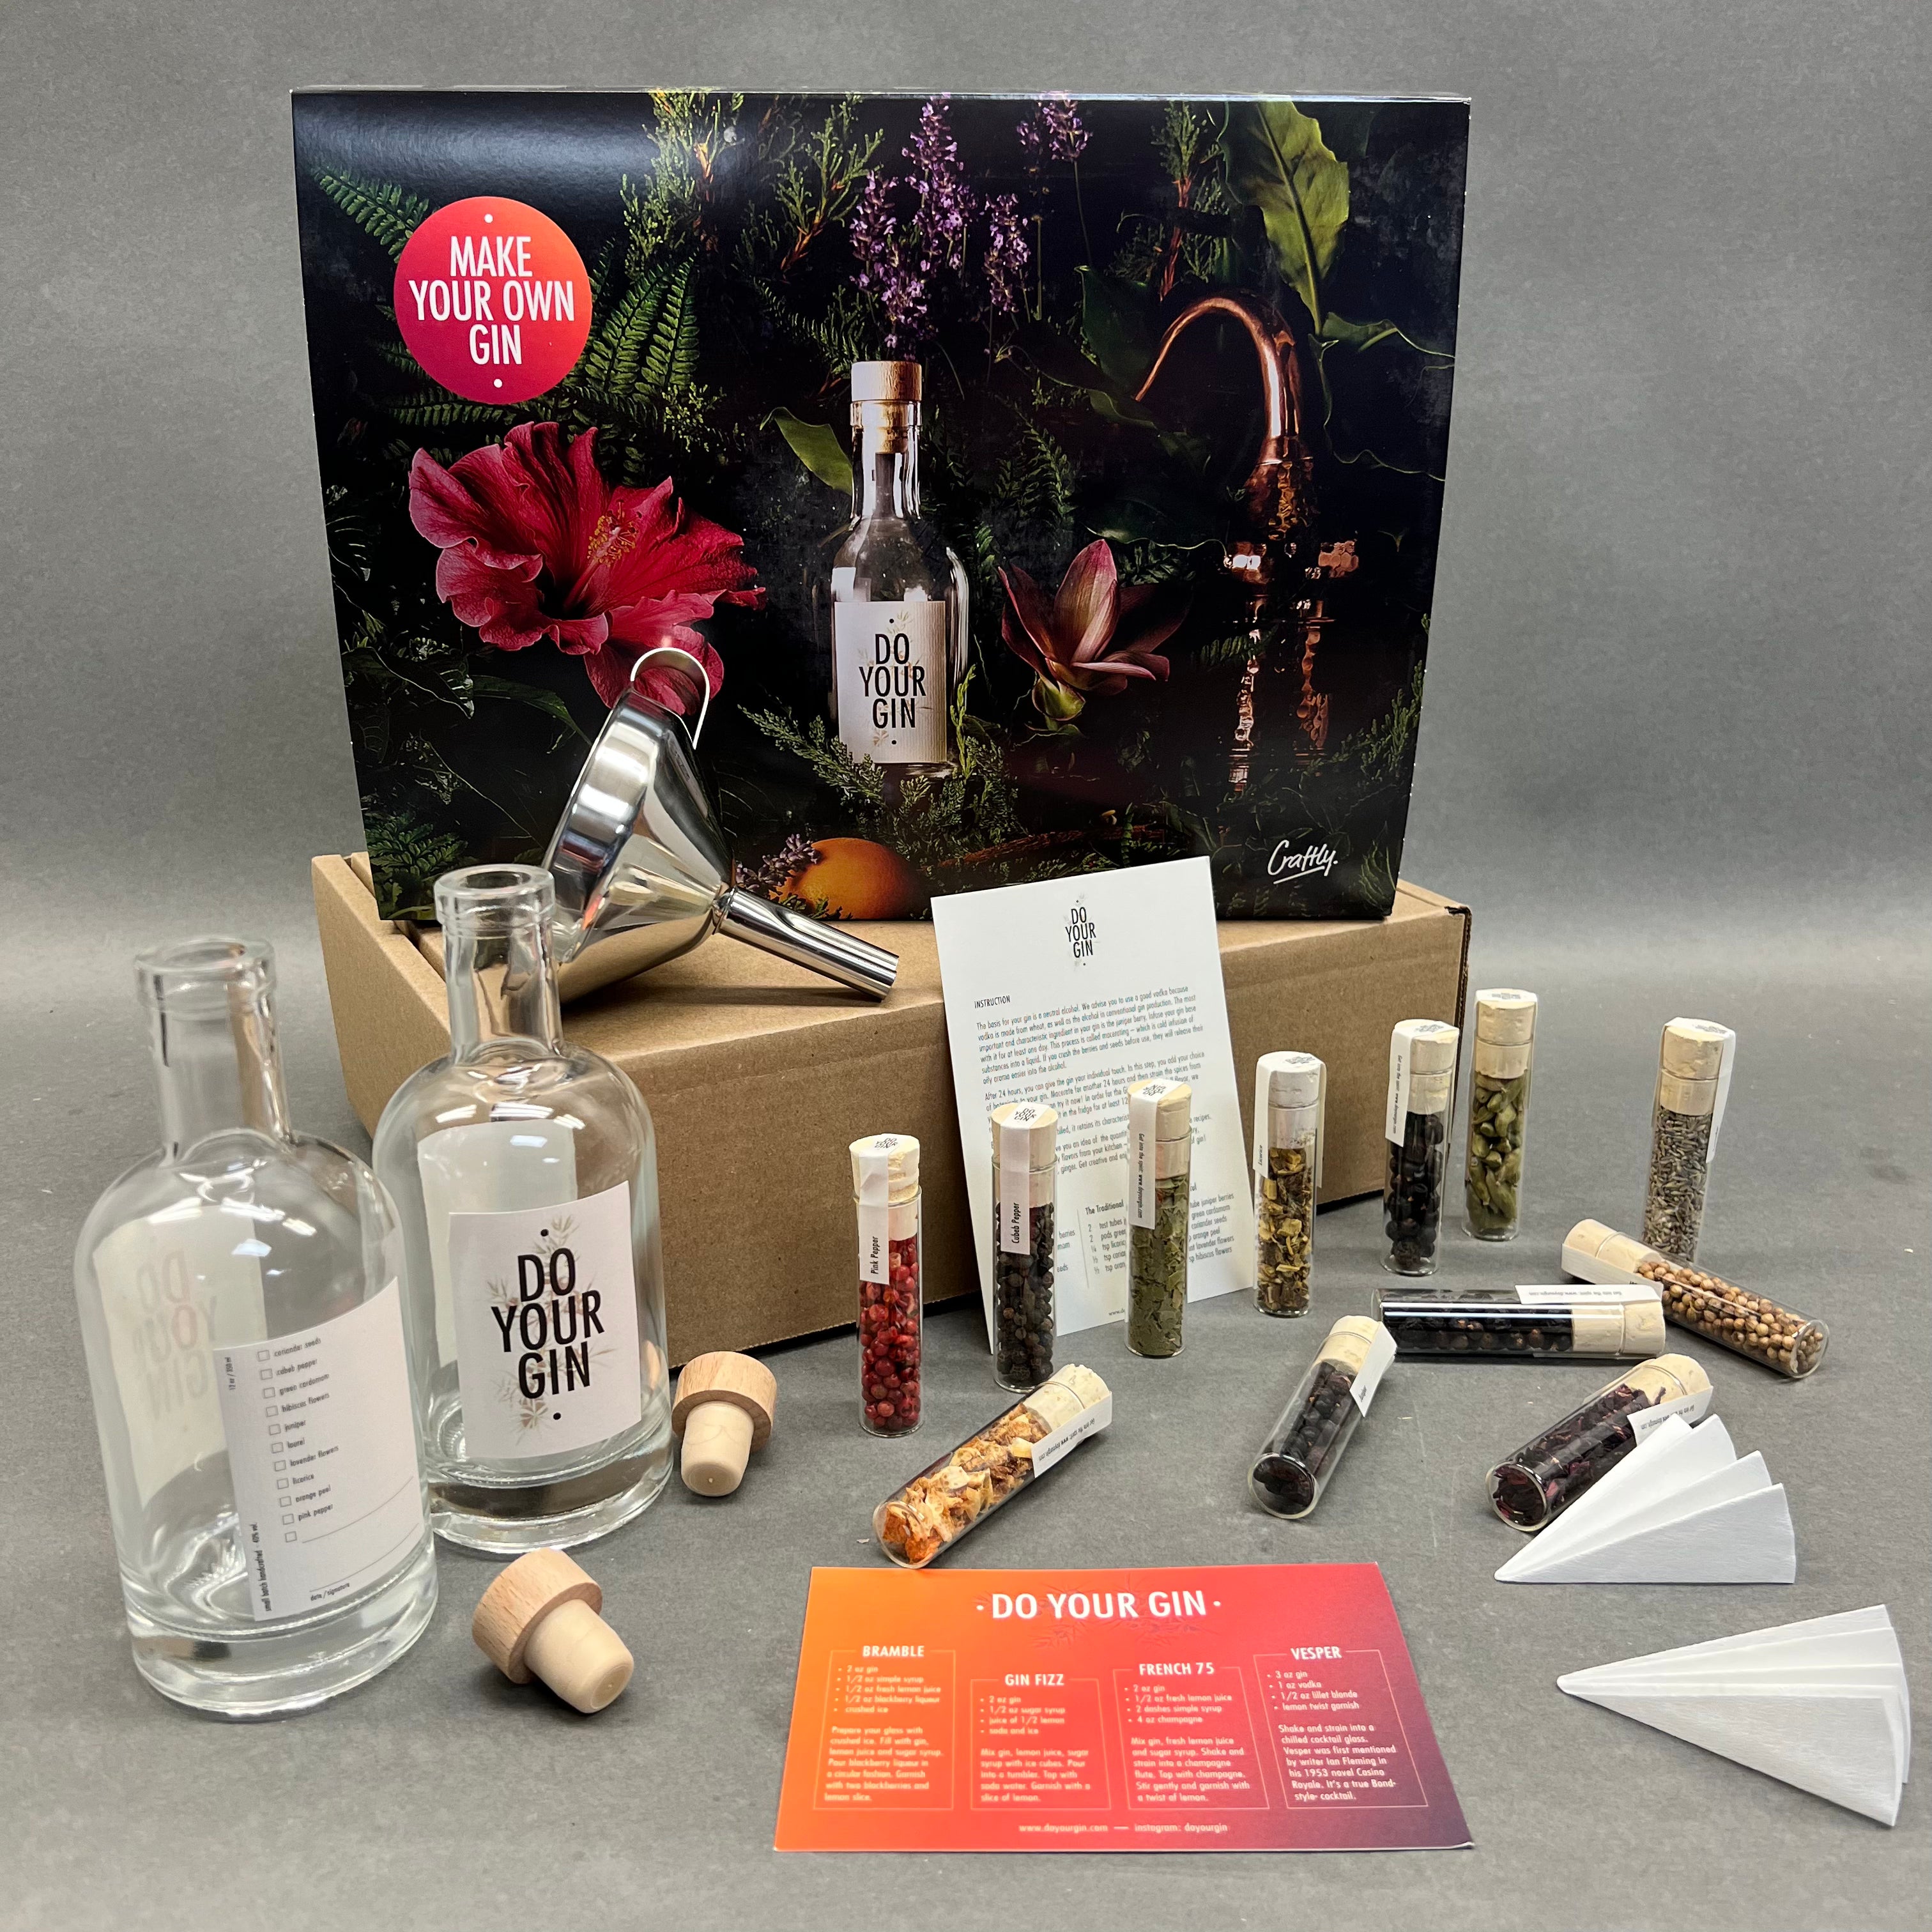 DO YOUR GIN - it's GIVEAWAY o'clock! ••• Win DO YOUR GIN kit by following  these easy steps: 1. Follow us 2. Tag 3 friends you would like to drink gin  with